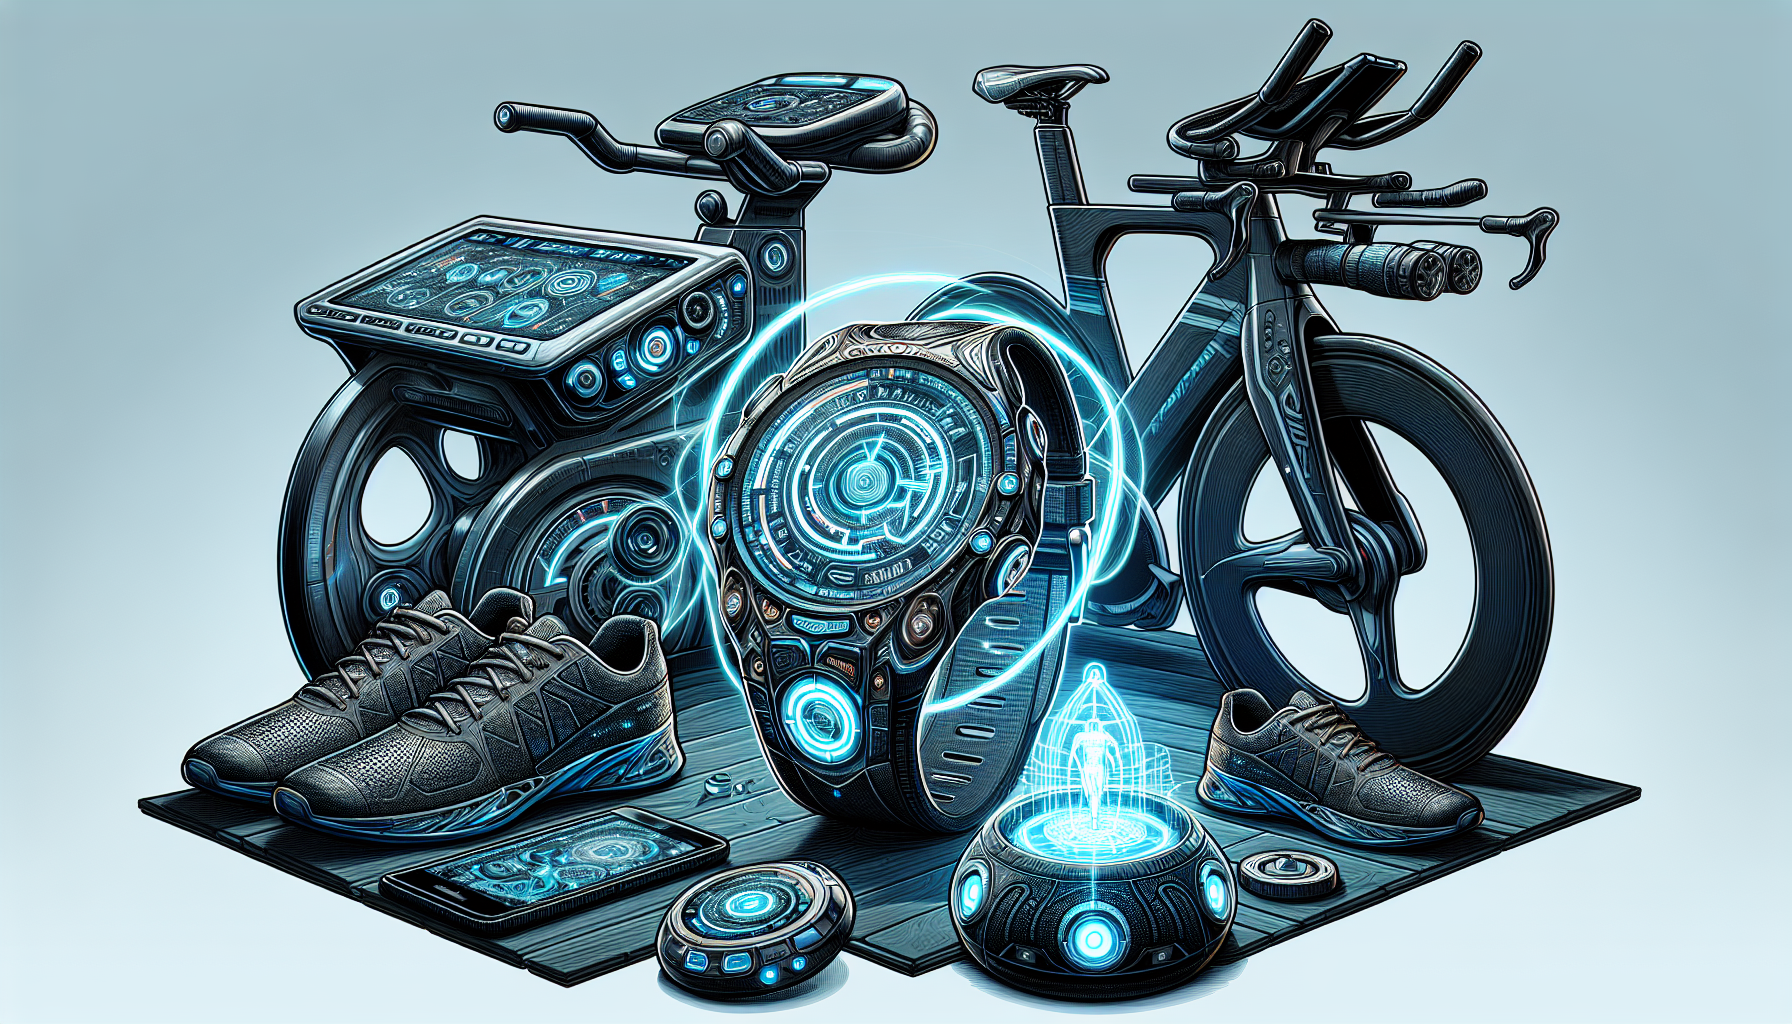 Illustration of modern training tools and gadgets for triathletes